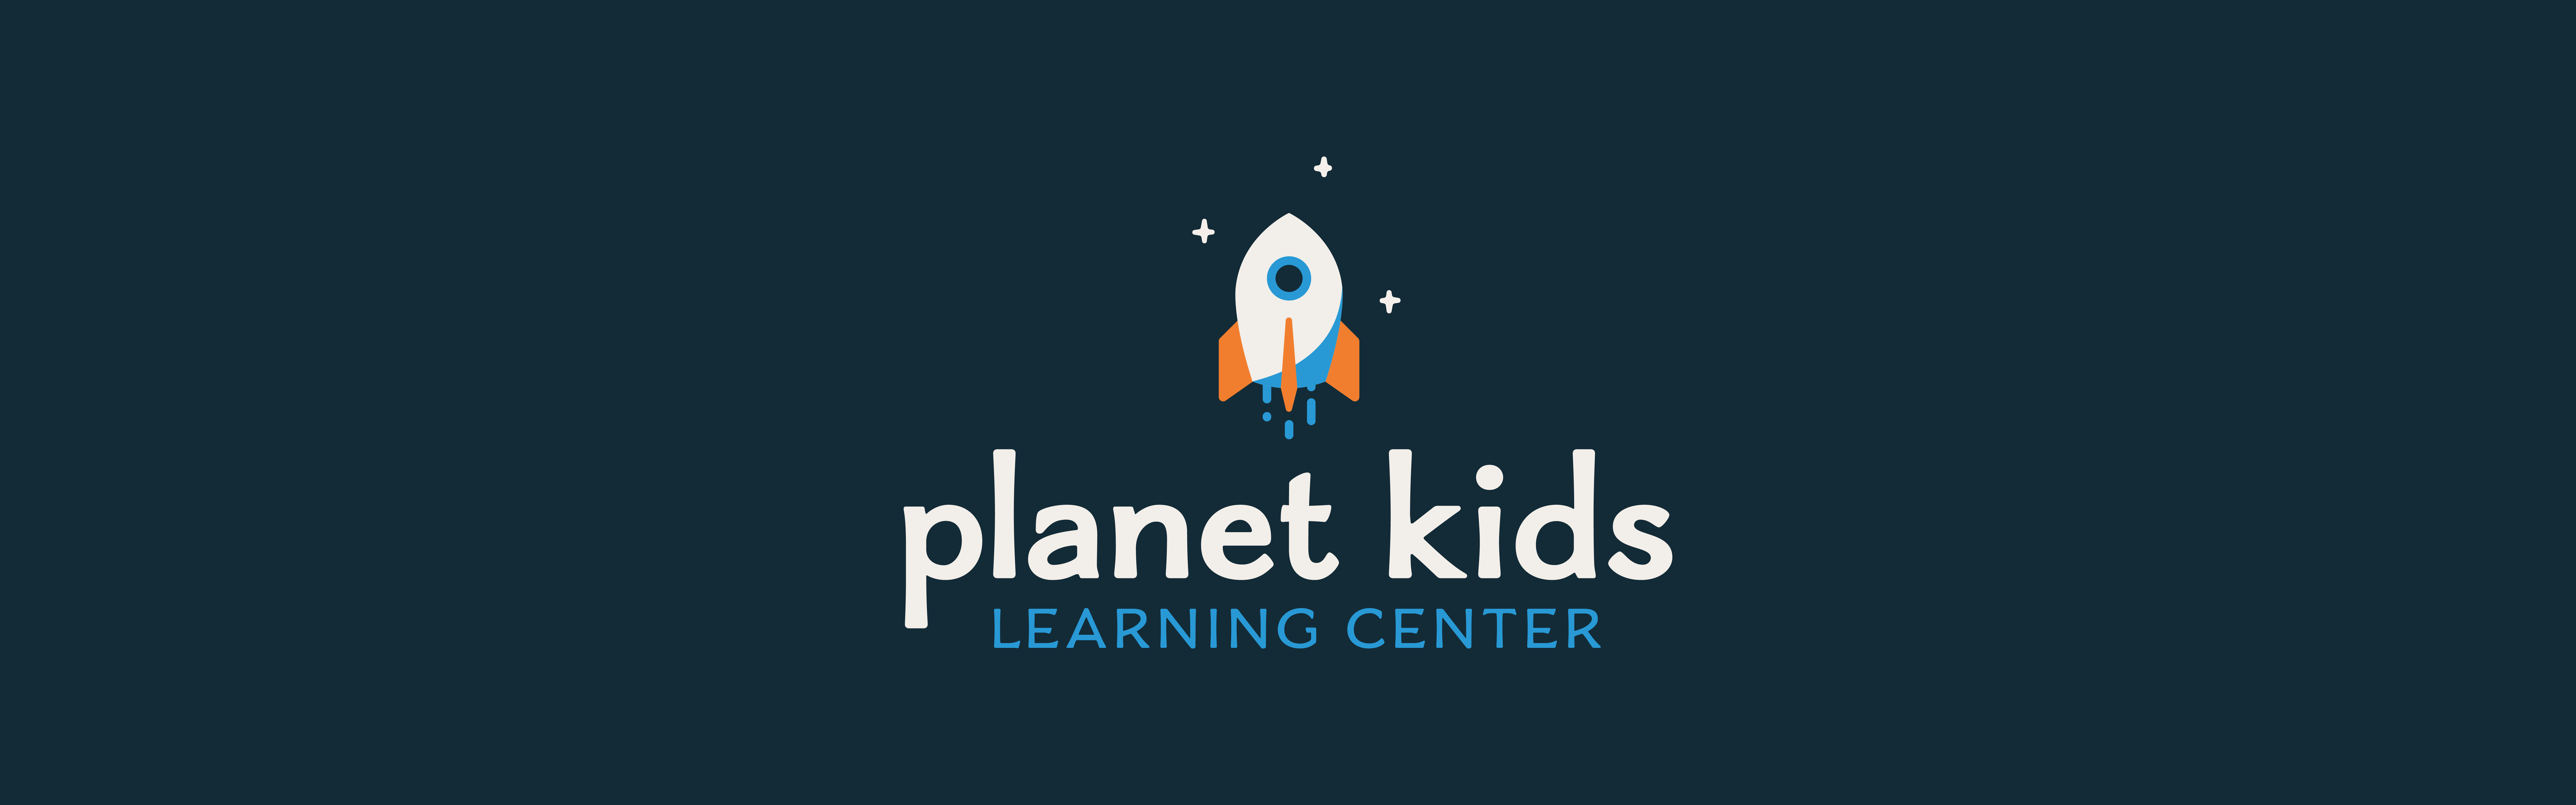 Logo for "Planet Kids Learning Center" featuring a stylized rocket resembling a pencil soaring upwards with stars in the background.